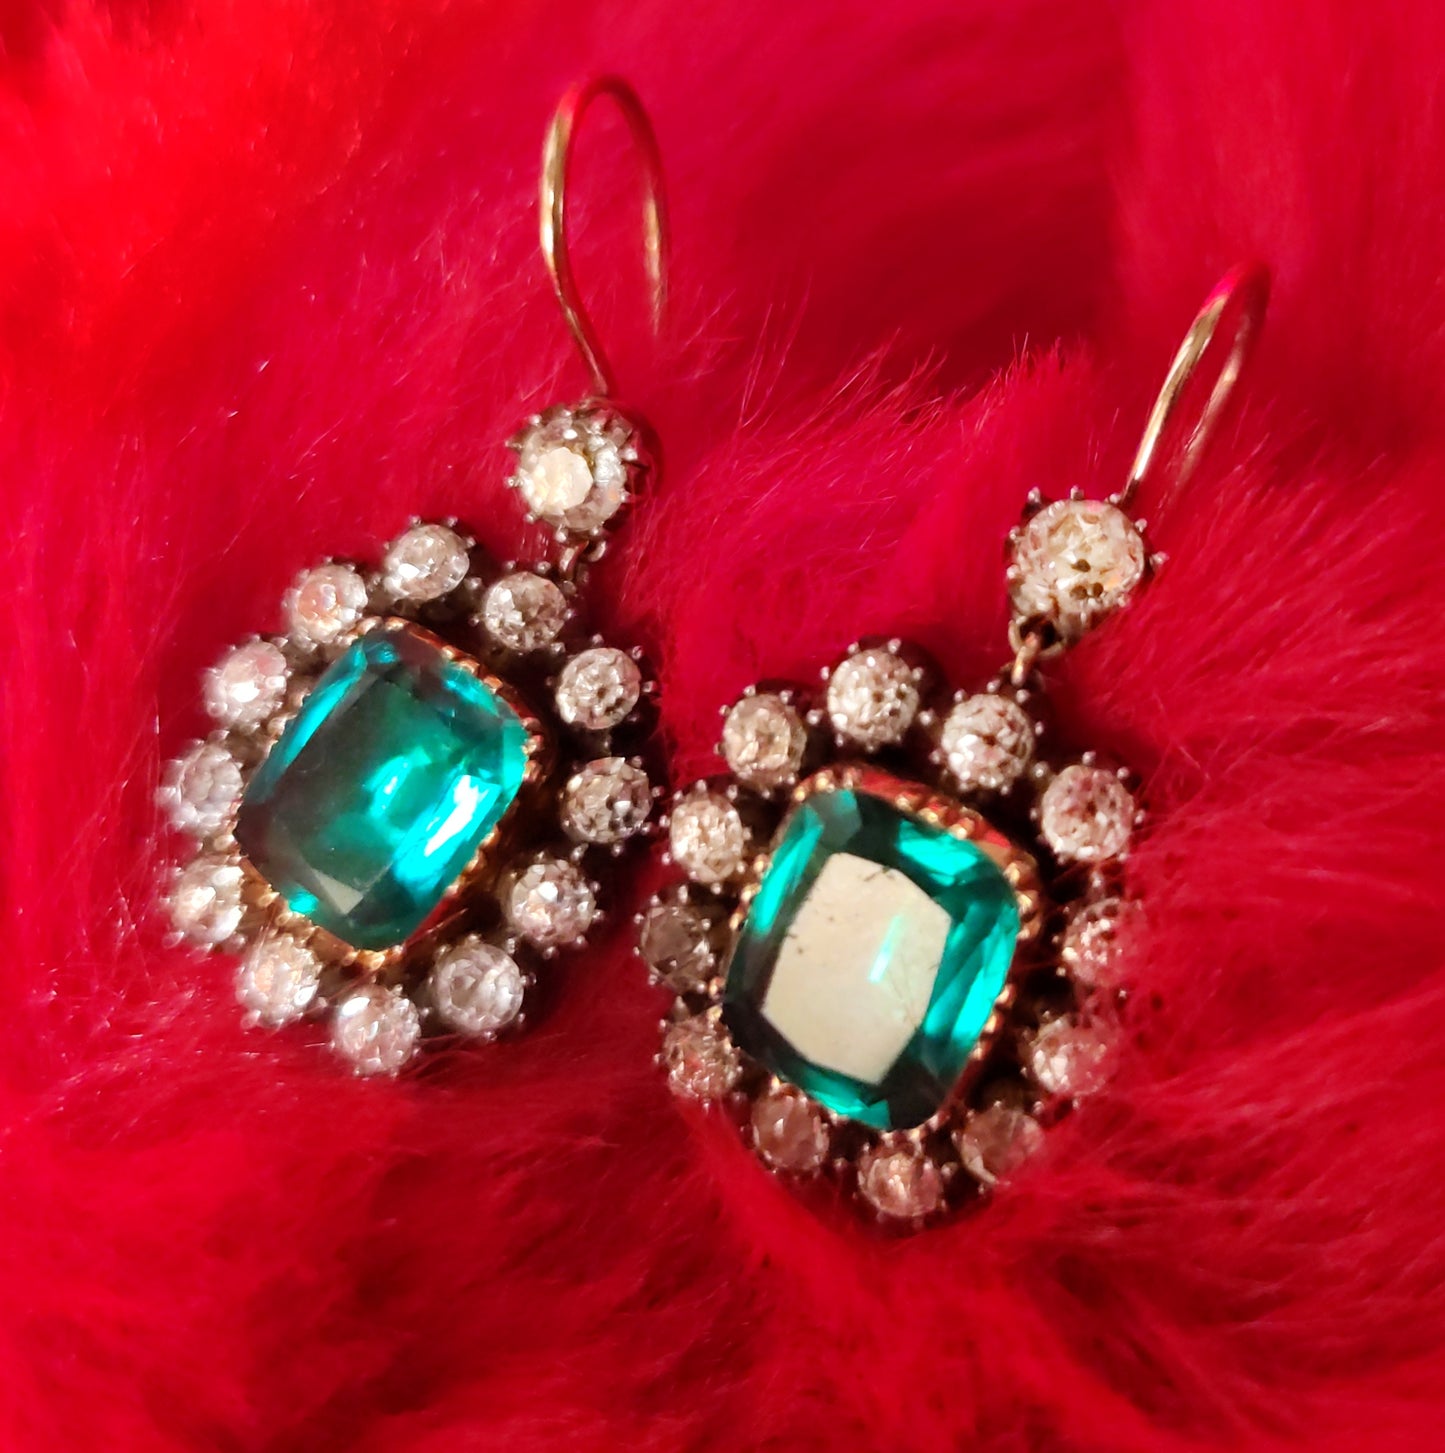 French emerald green and clear paste halo earrings.